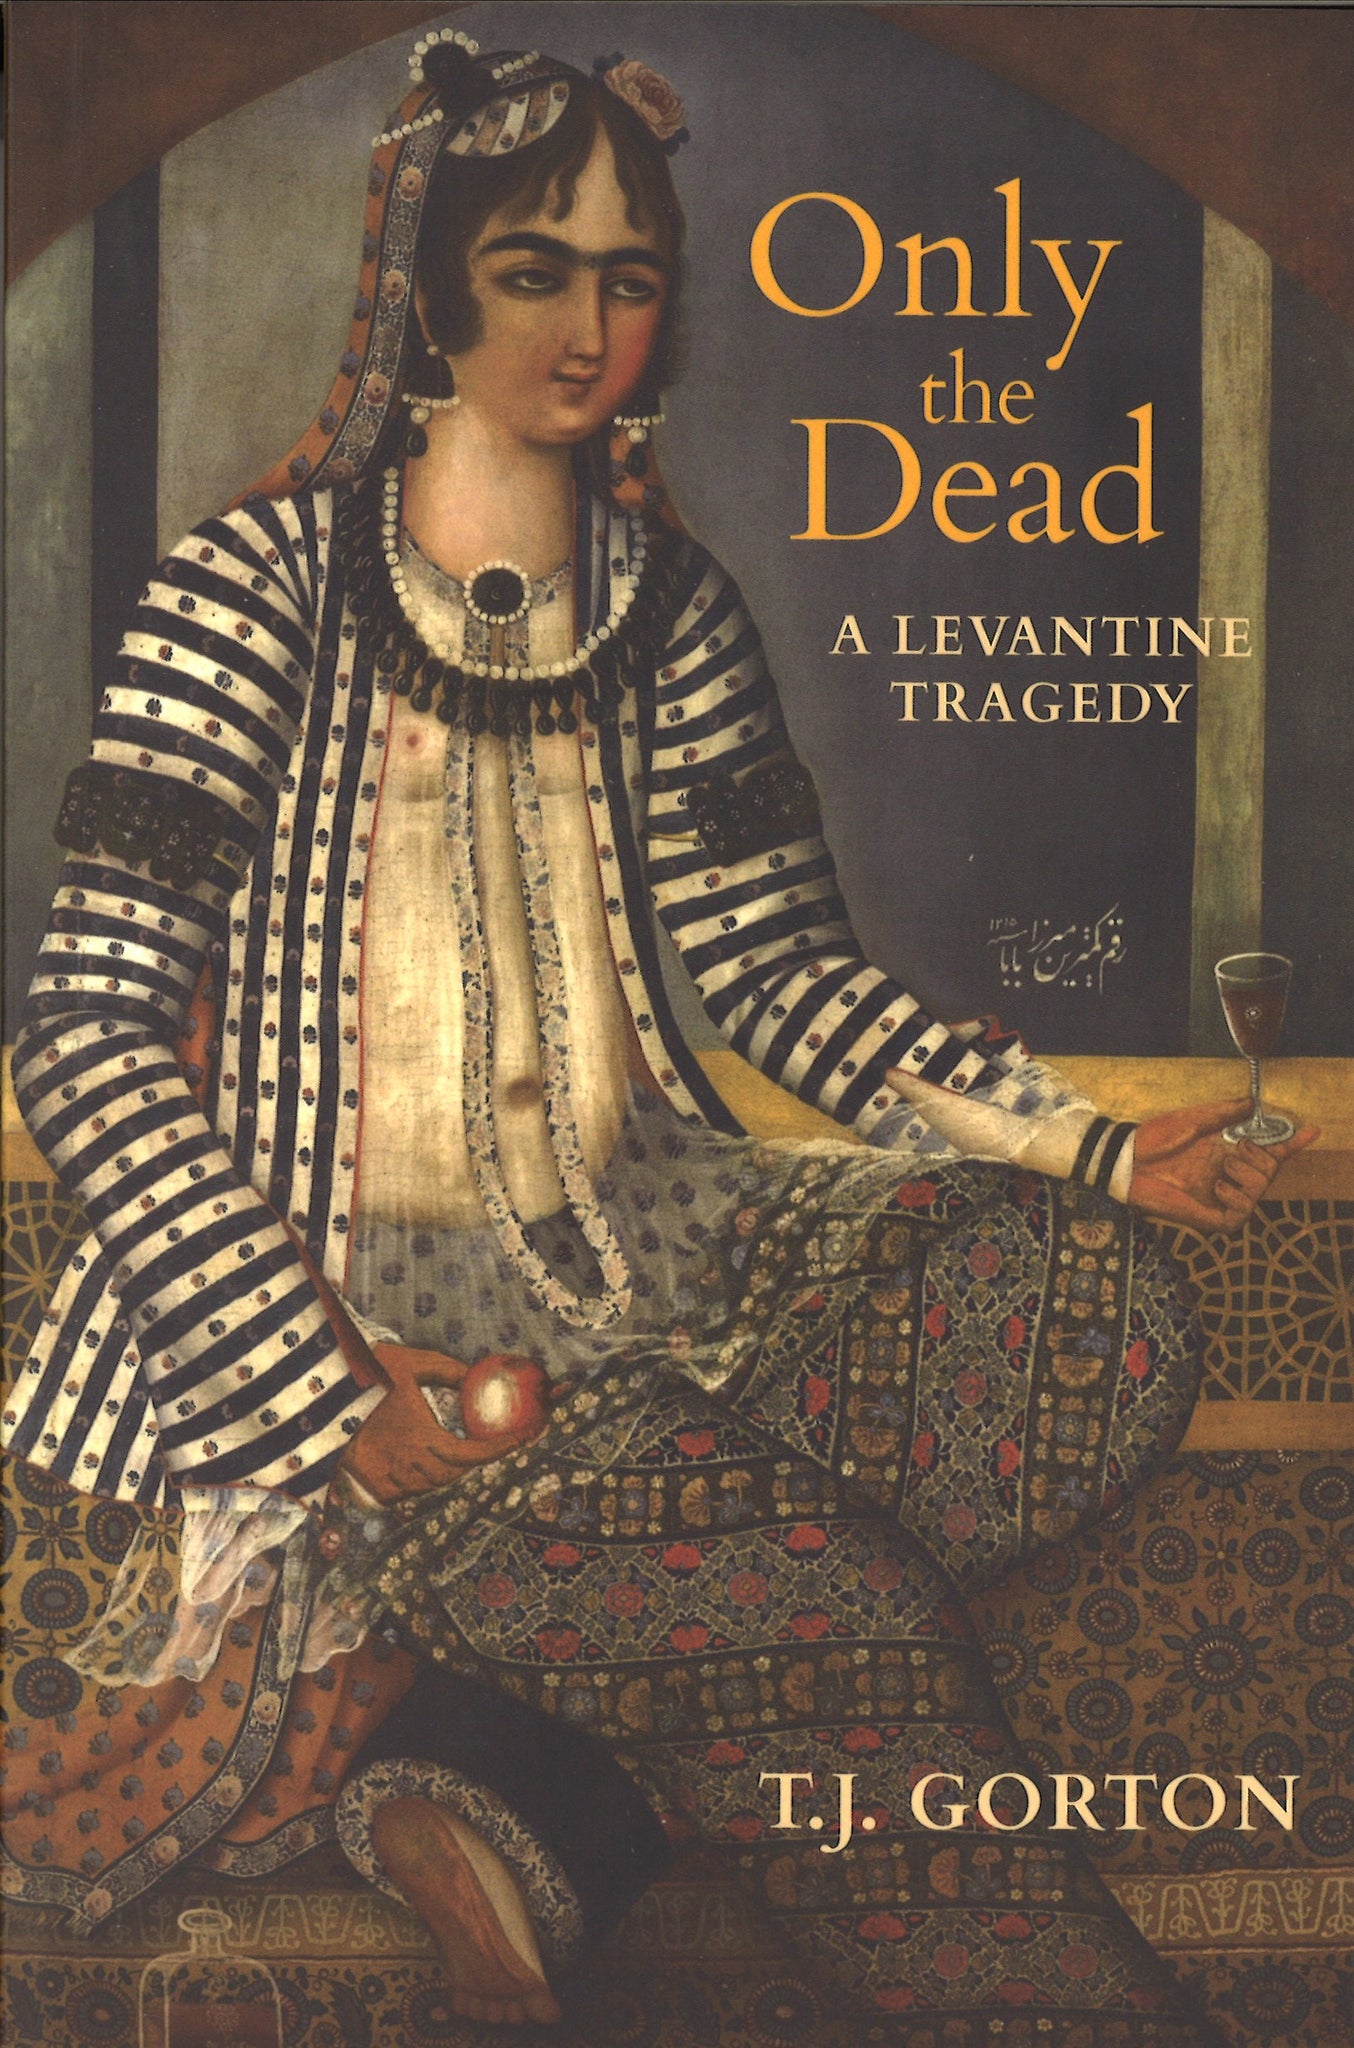 ONLY THE DEAD: A Levantine Tragedy